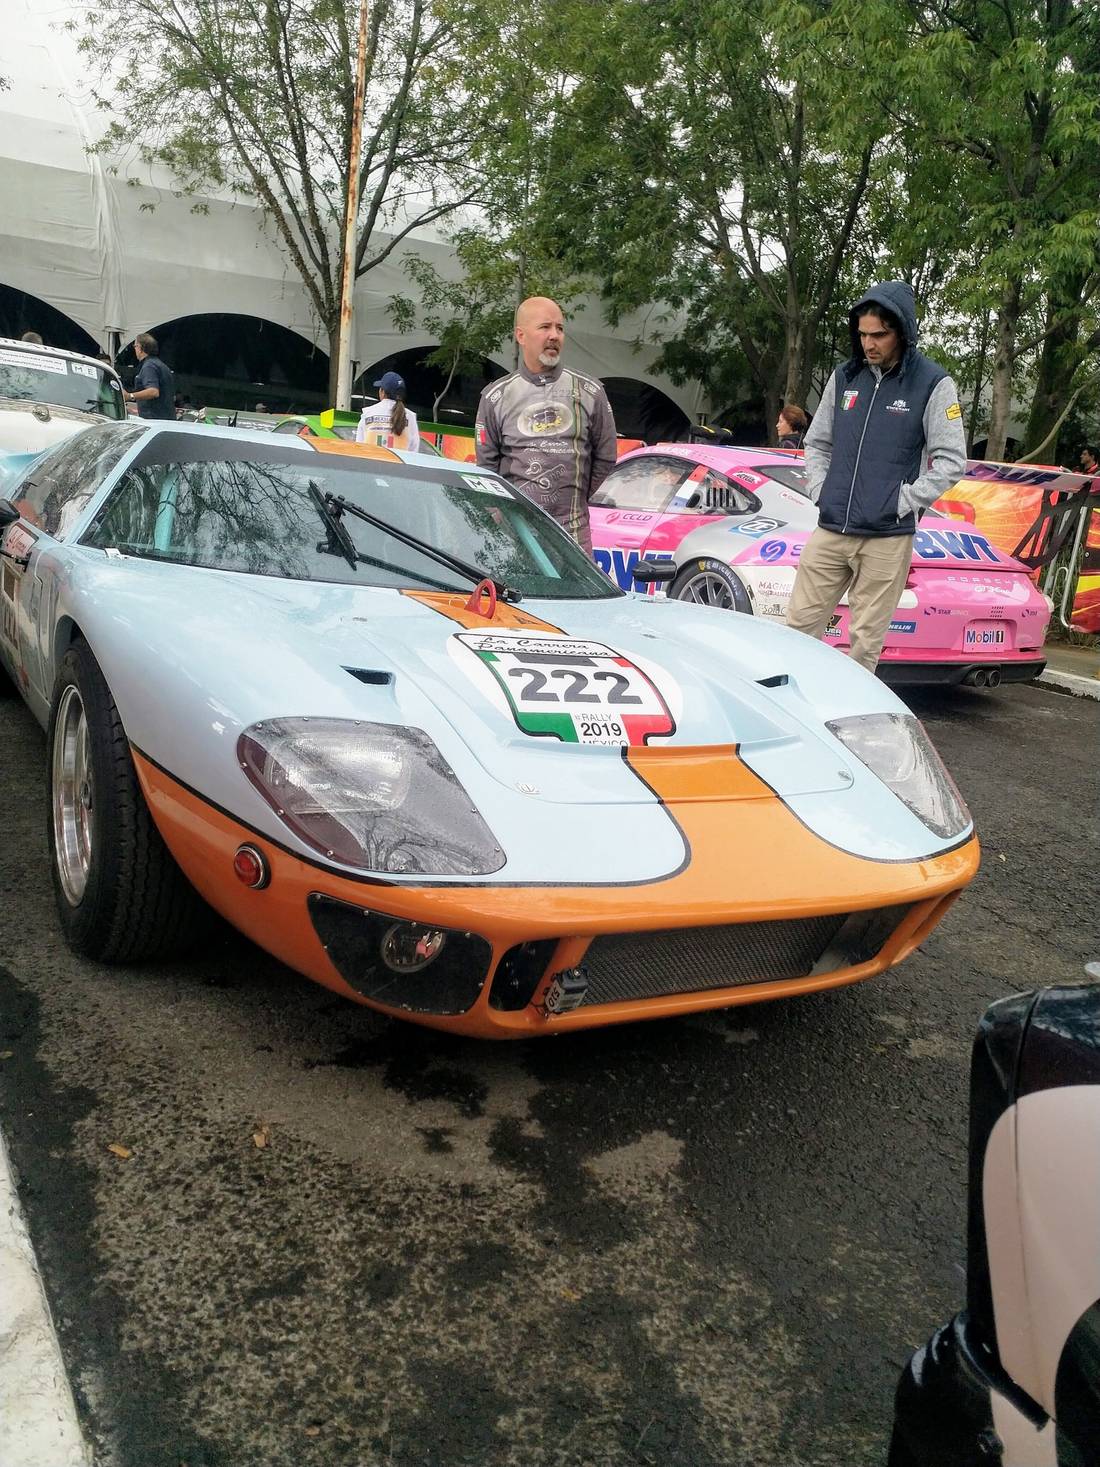 Old Ford GT (a legend)